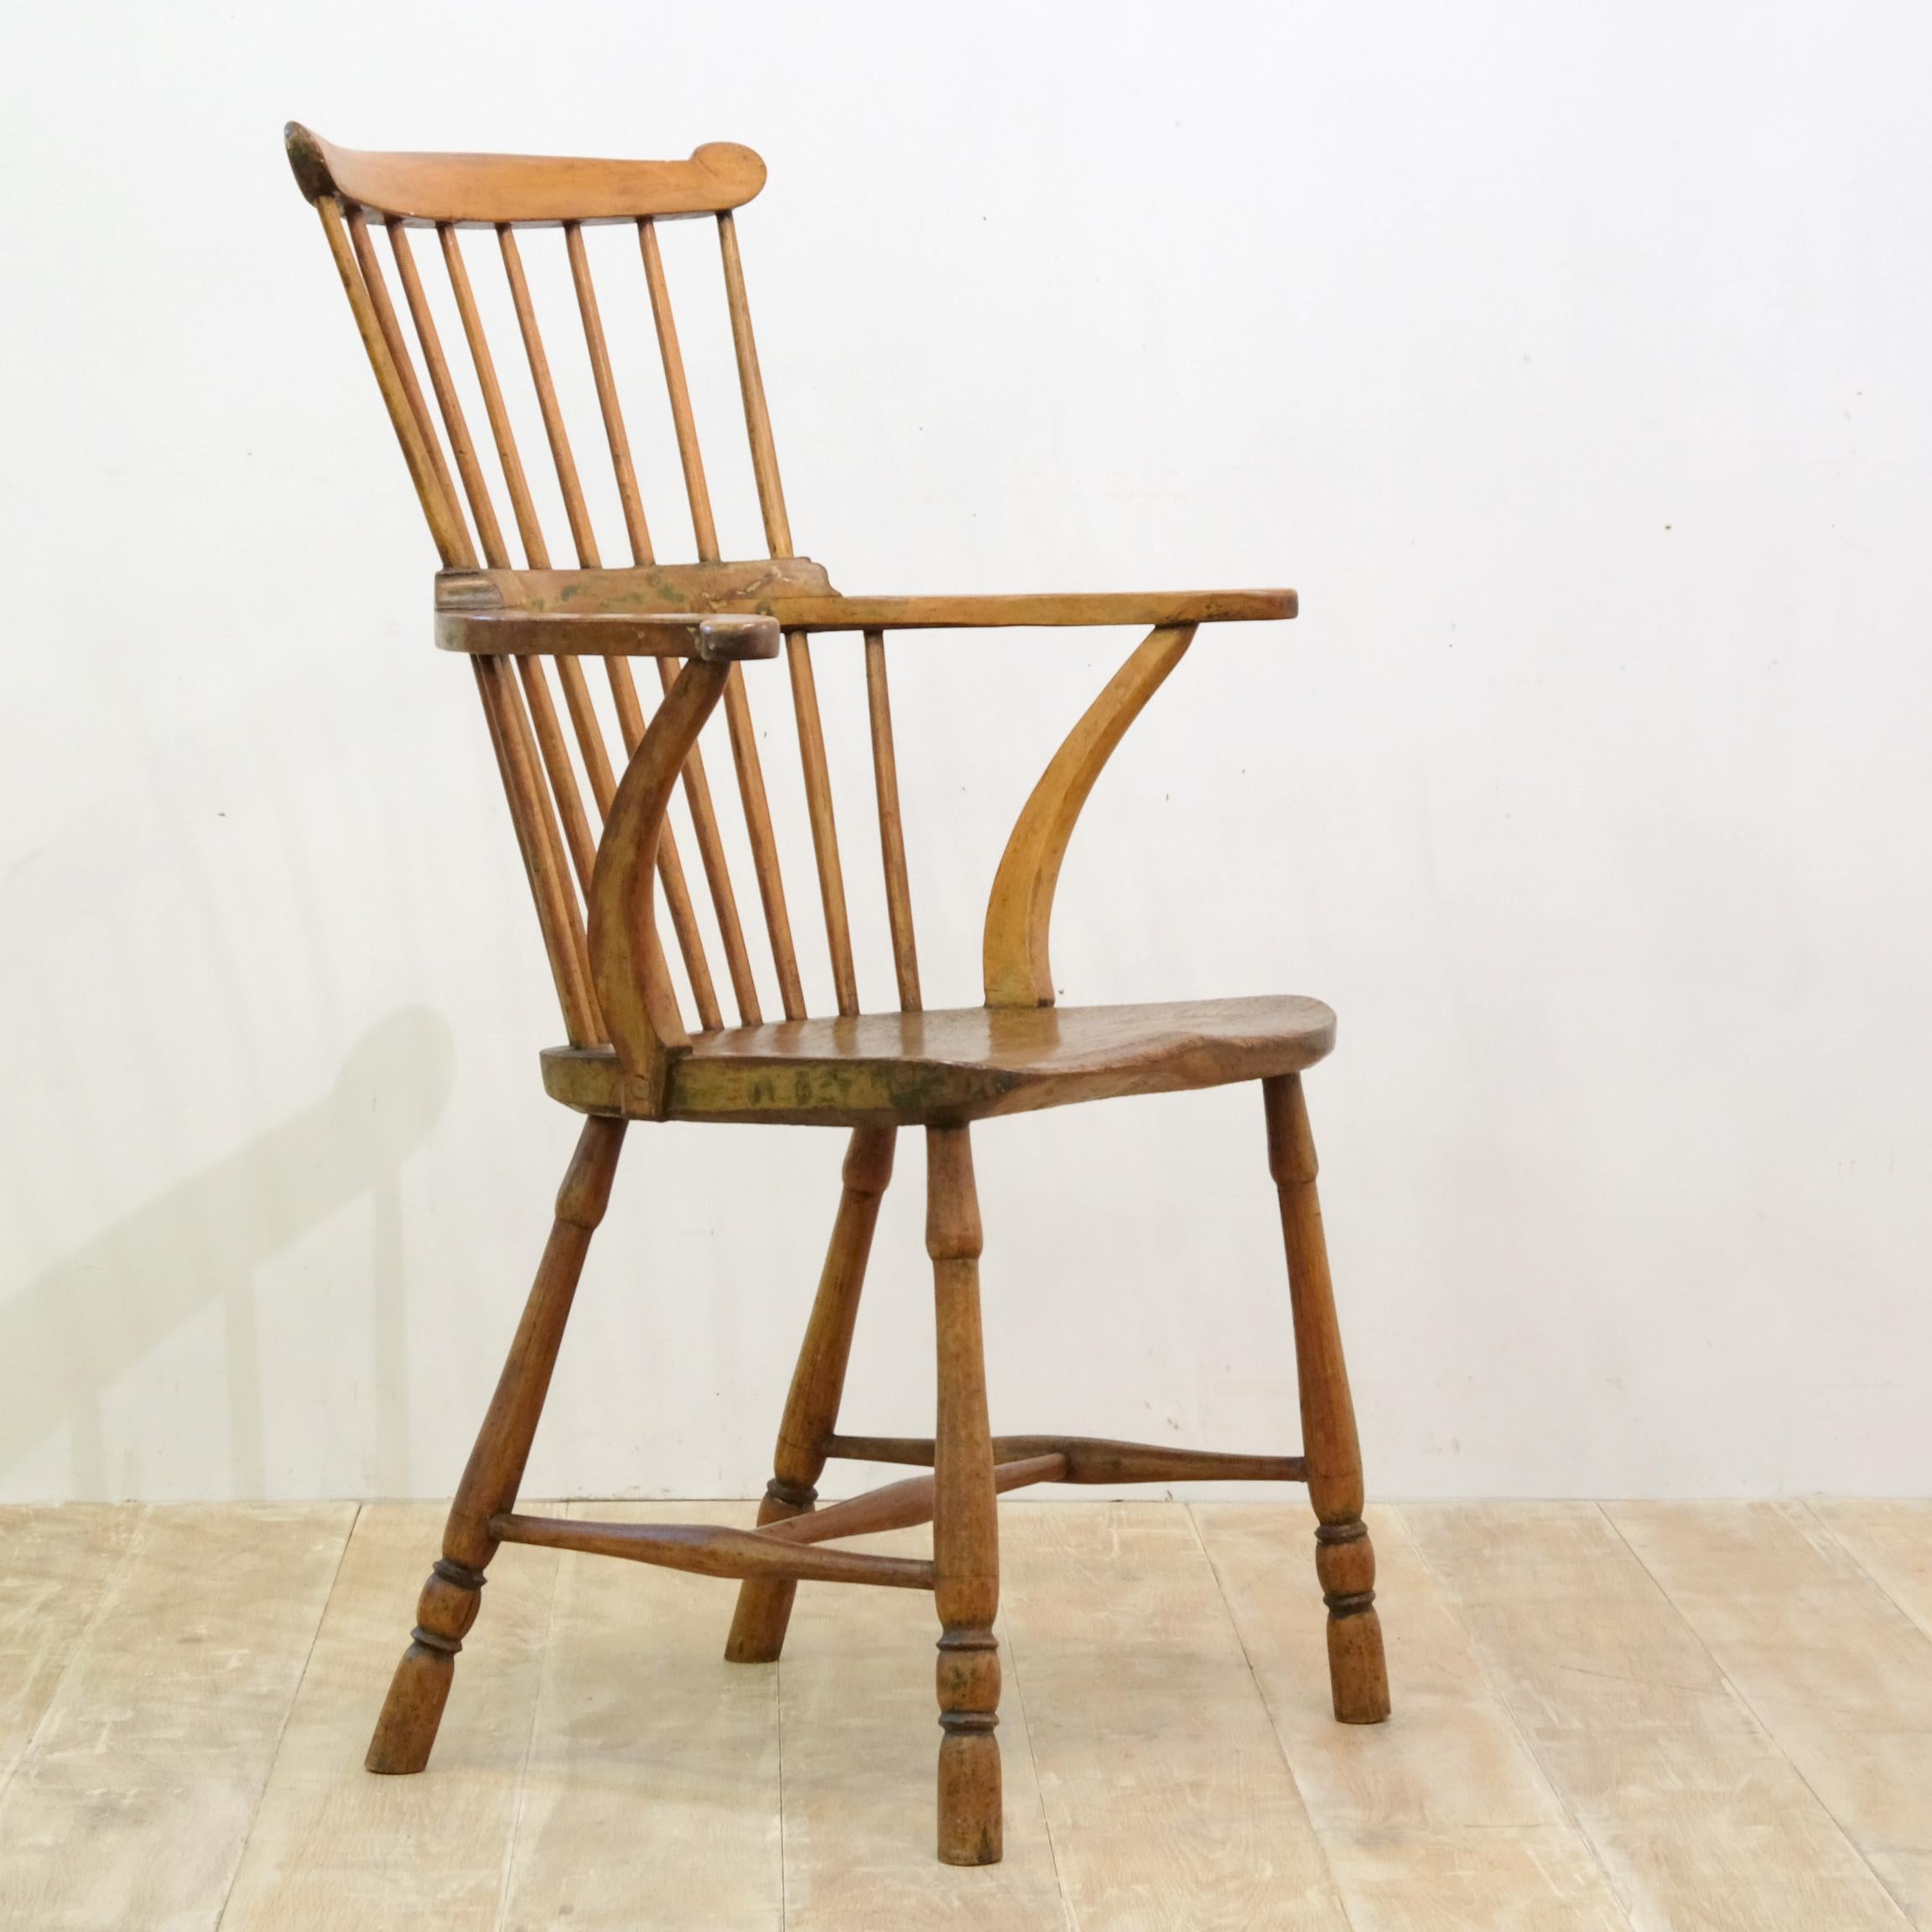 A rather wonderful George III provincially made comb back Windsor armchair. This country chair is perfectly formed and incredibly appealing. It exhibits plenty of its original green paint and the roughly hand-hewn elm seat has a sumptuous color and